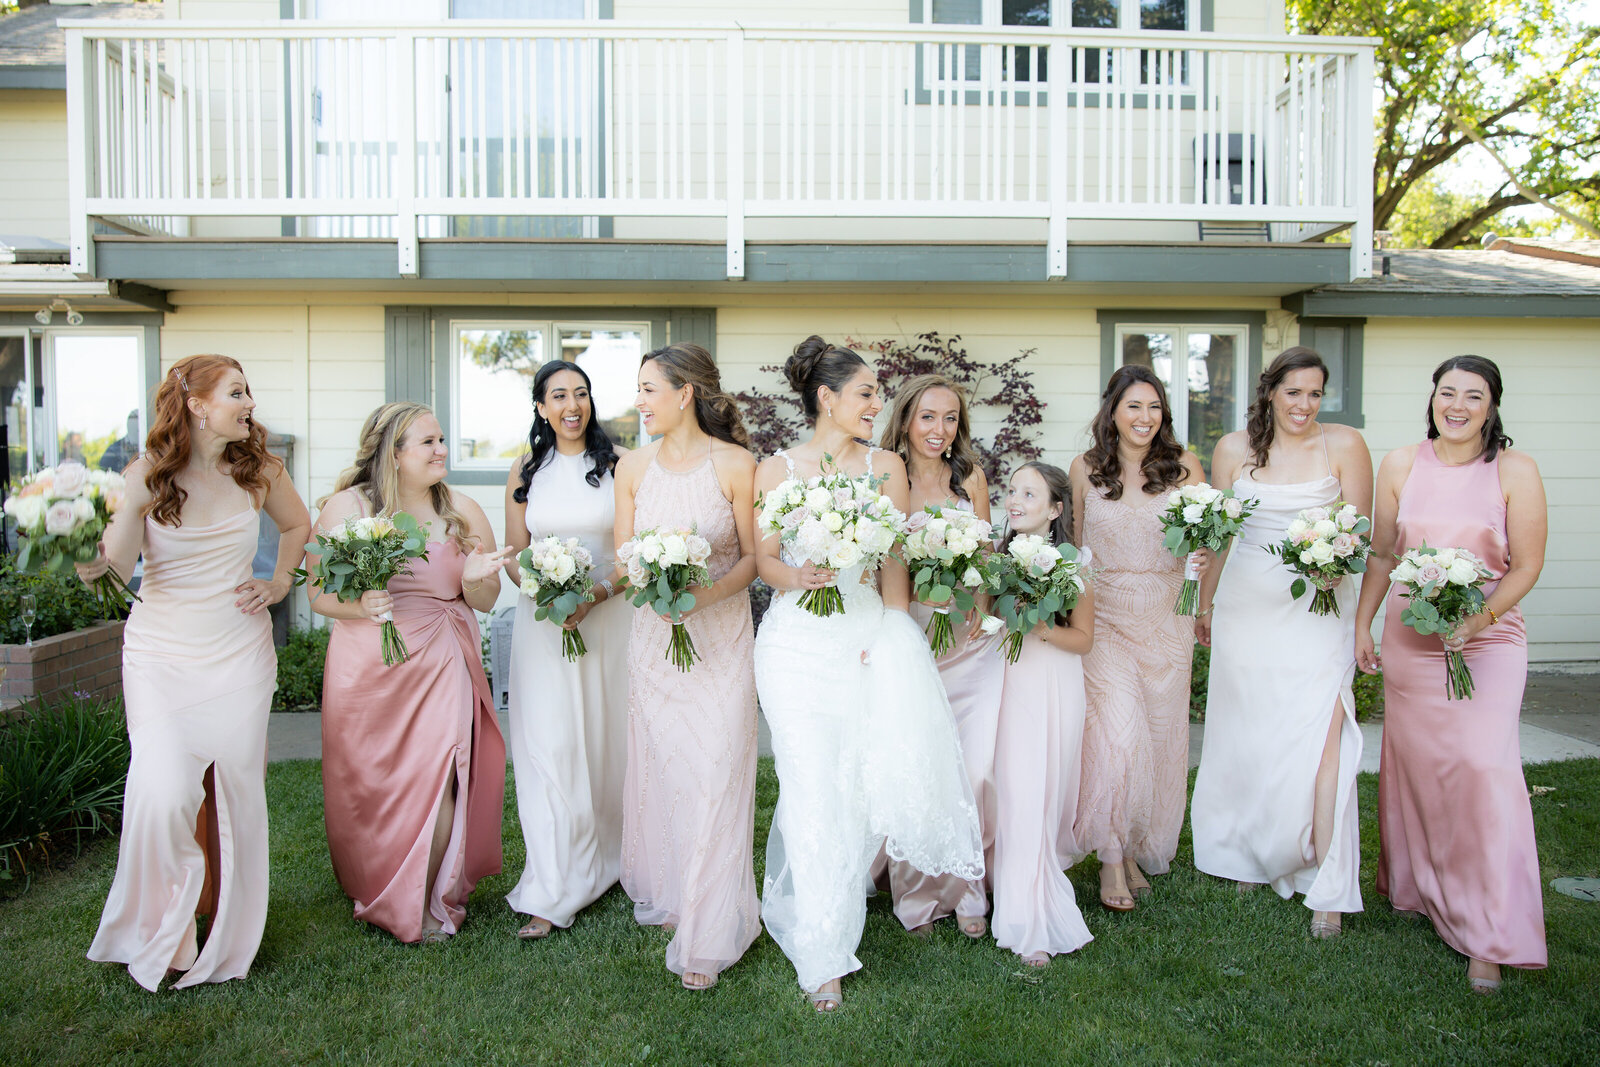 Bridesmaids walk and engage in conversation before wedding in pink dresses while holding bouquet of flowers. Photo by Sacramento area photographer Philippe Studio Pro.